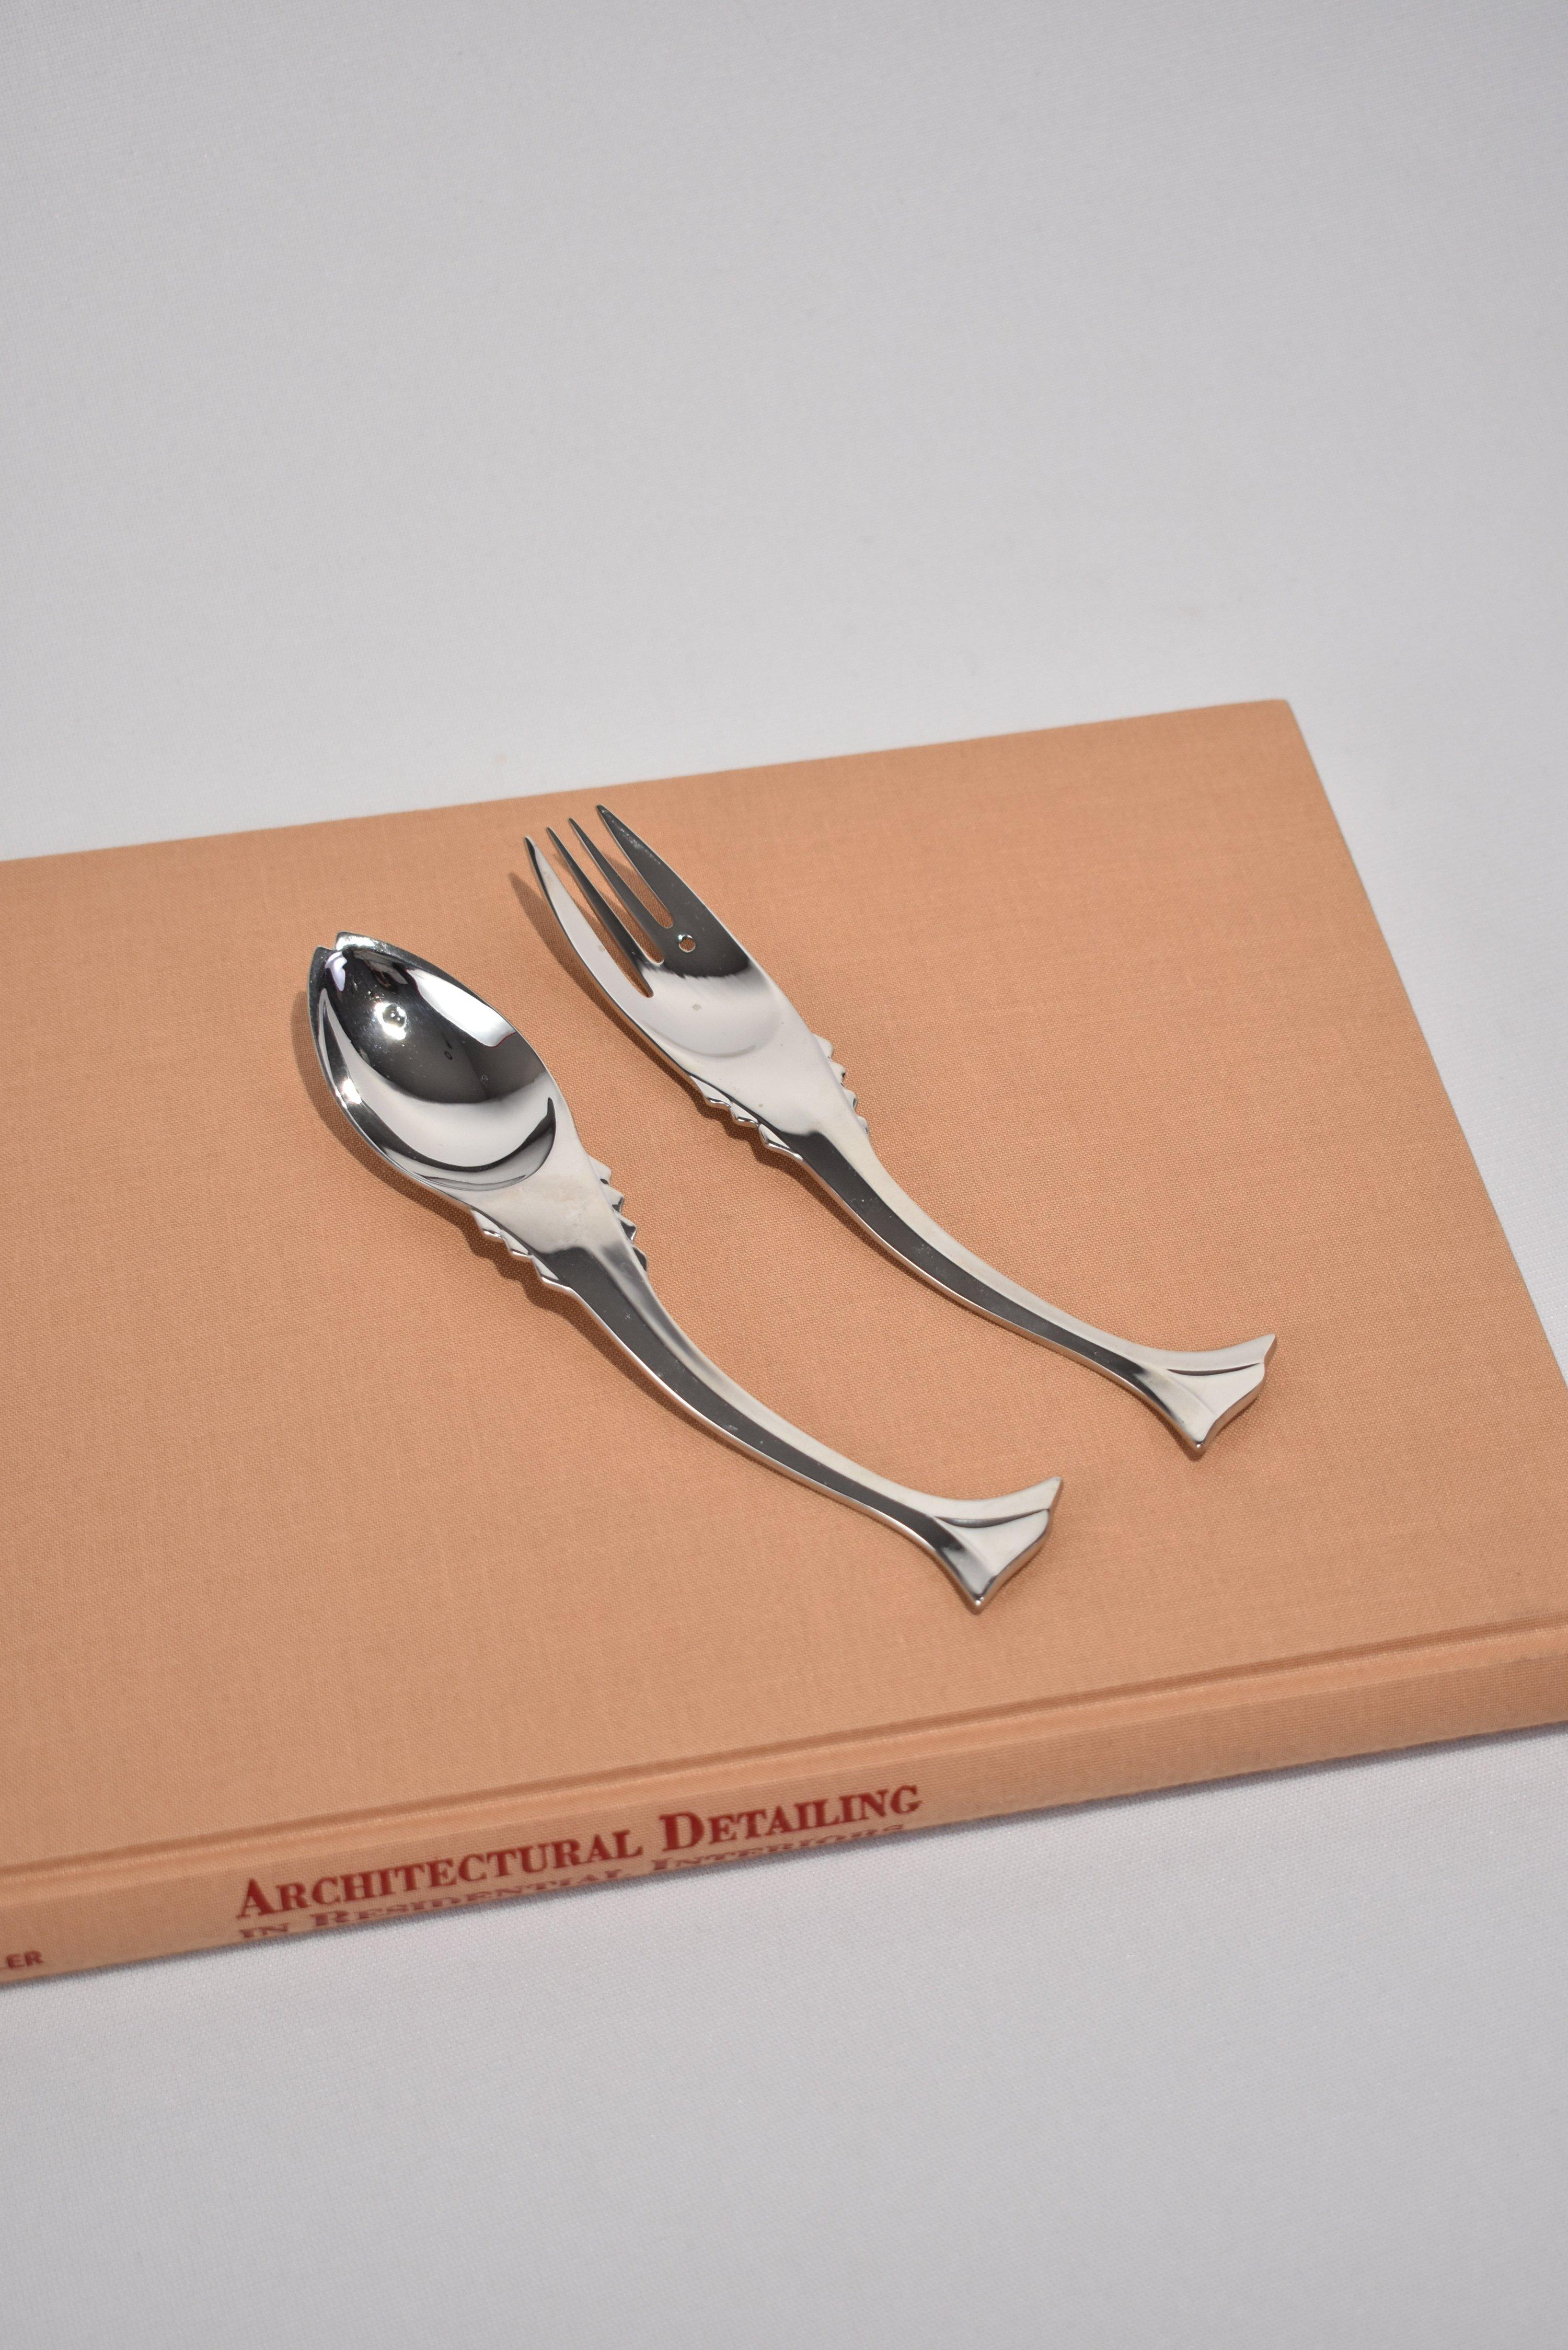 Vintage, stainless steel flatware set in abstract fish shapes. By Ricci Argentieri. Purchase includes one set of five pieces.

Dimensions: 
Knife, 9 in. long (22.86cm)
Spoon, 7.5 in. long (19.05cm)
Fork, 7.5 in. long (19.05cm)
Spoon, 6.5 in.